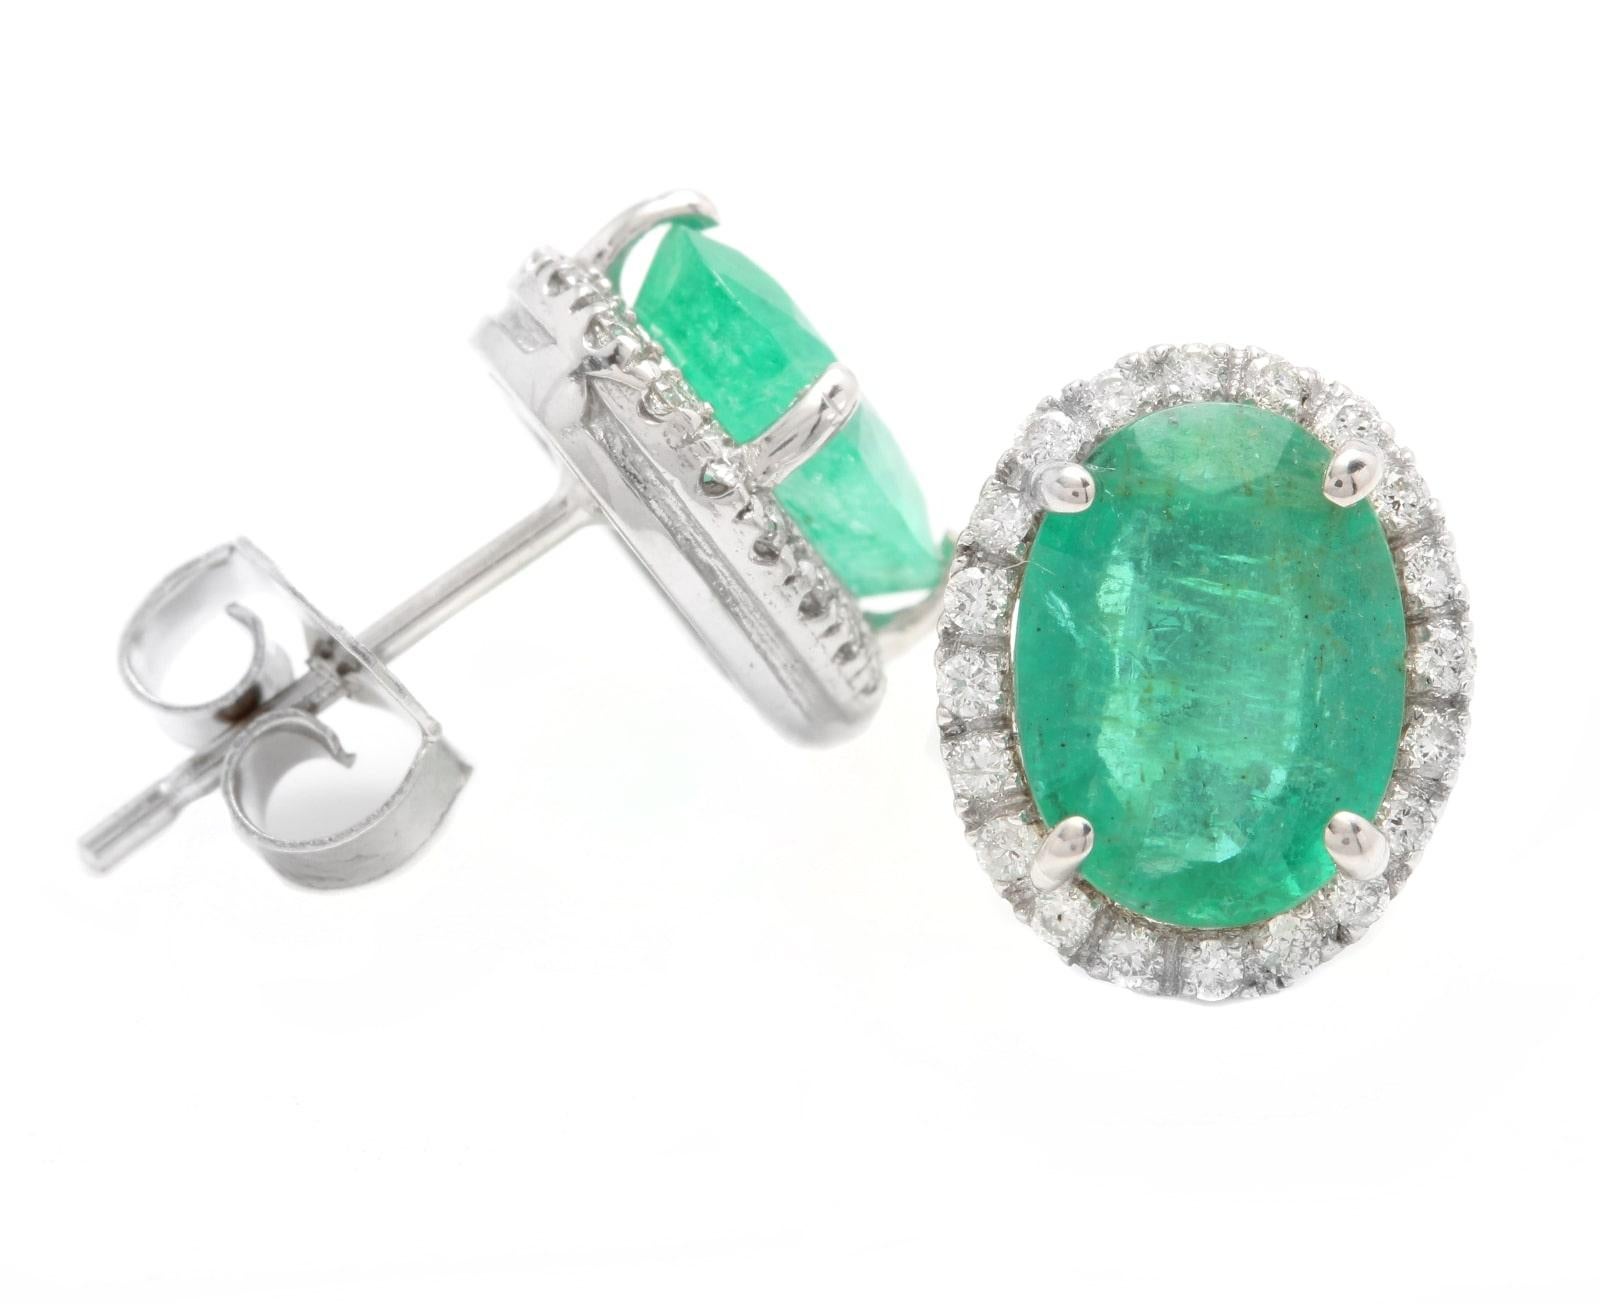 4.45 Carats Natural Emerald and Diamond 14K Solid White Gold Earrings

Amazing looking piece! 

Suggested Replacement Value Approx. $5,500.00

Total Natural Round Cut White Diamonds Weight: Approx.  0.45 Carats (color G-H / Clarity SI1-SI2)

Total